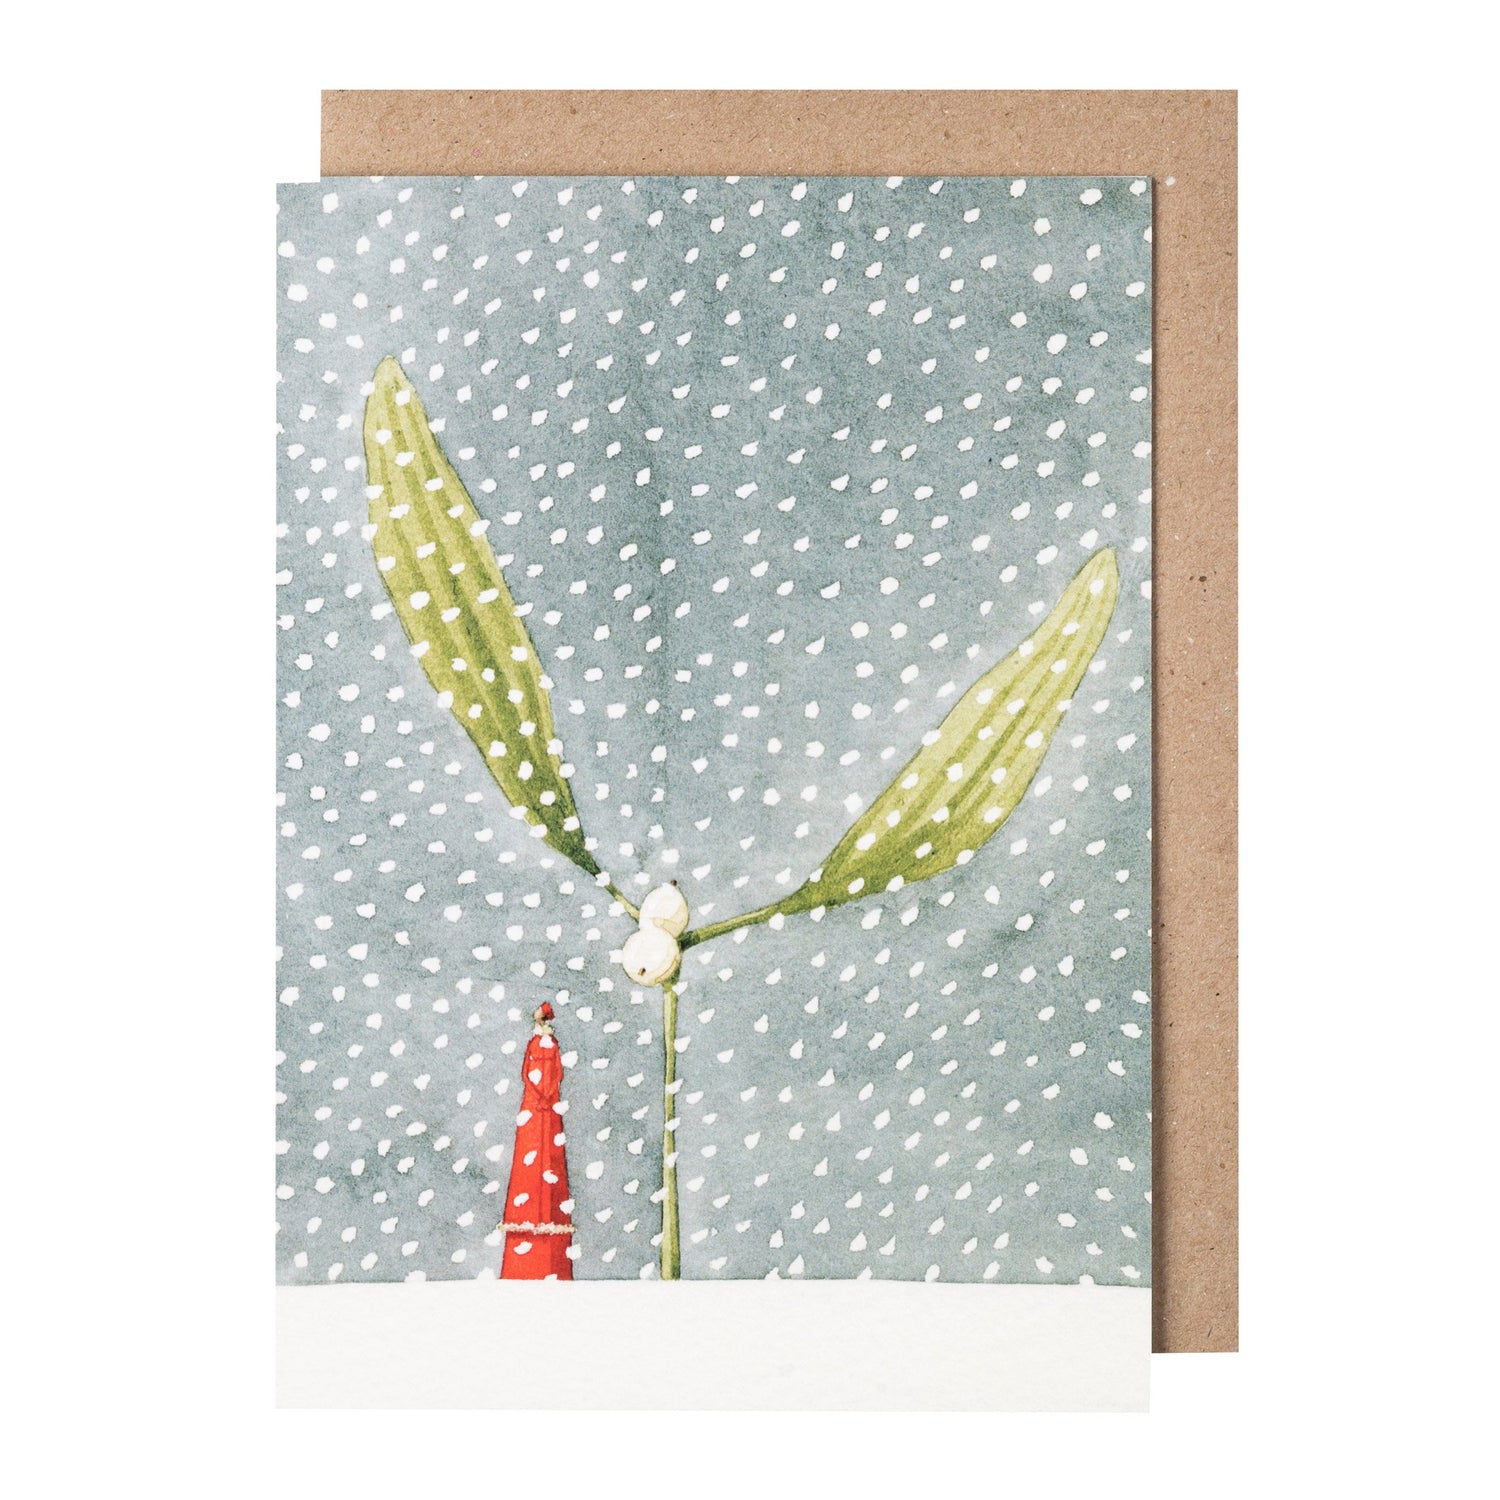 environmentally sustainable paper, compostable packaging, recycled paper, made in england, illustration, mistletoe, snow, christmas